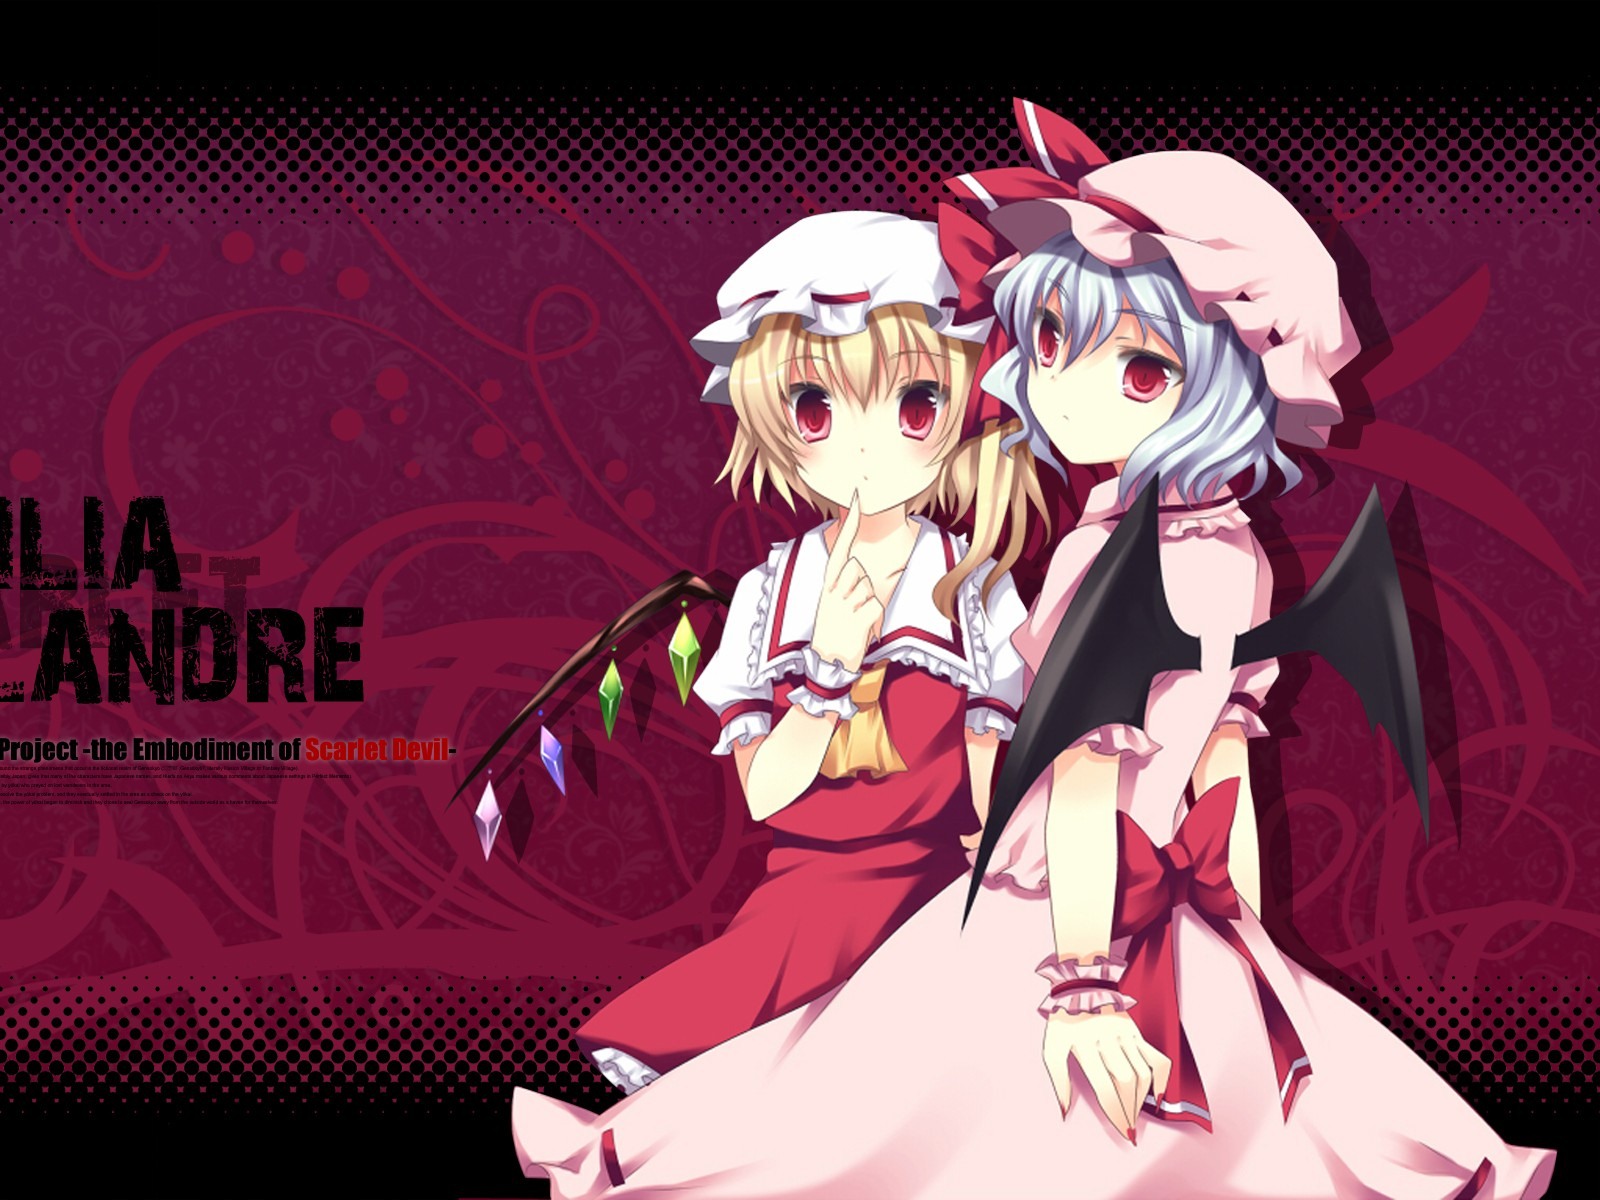 Touhou Project caricature HD wallpapers #8 - 1600x1200